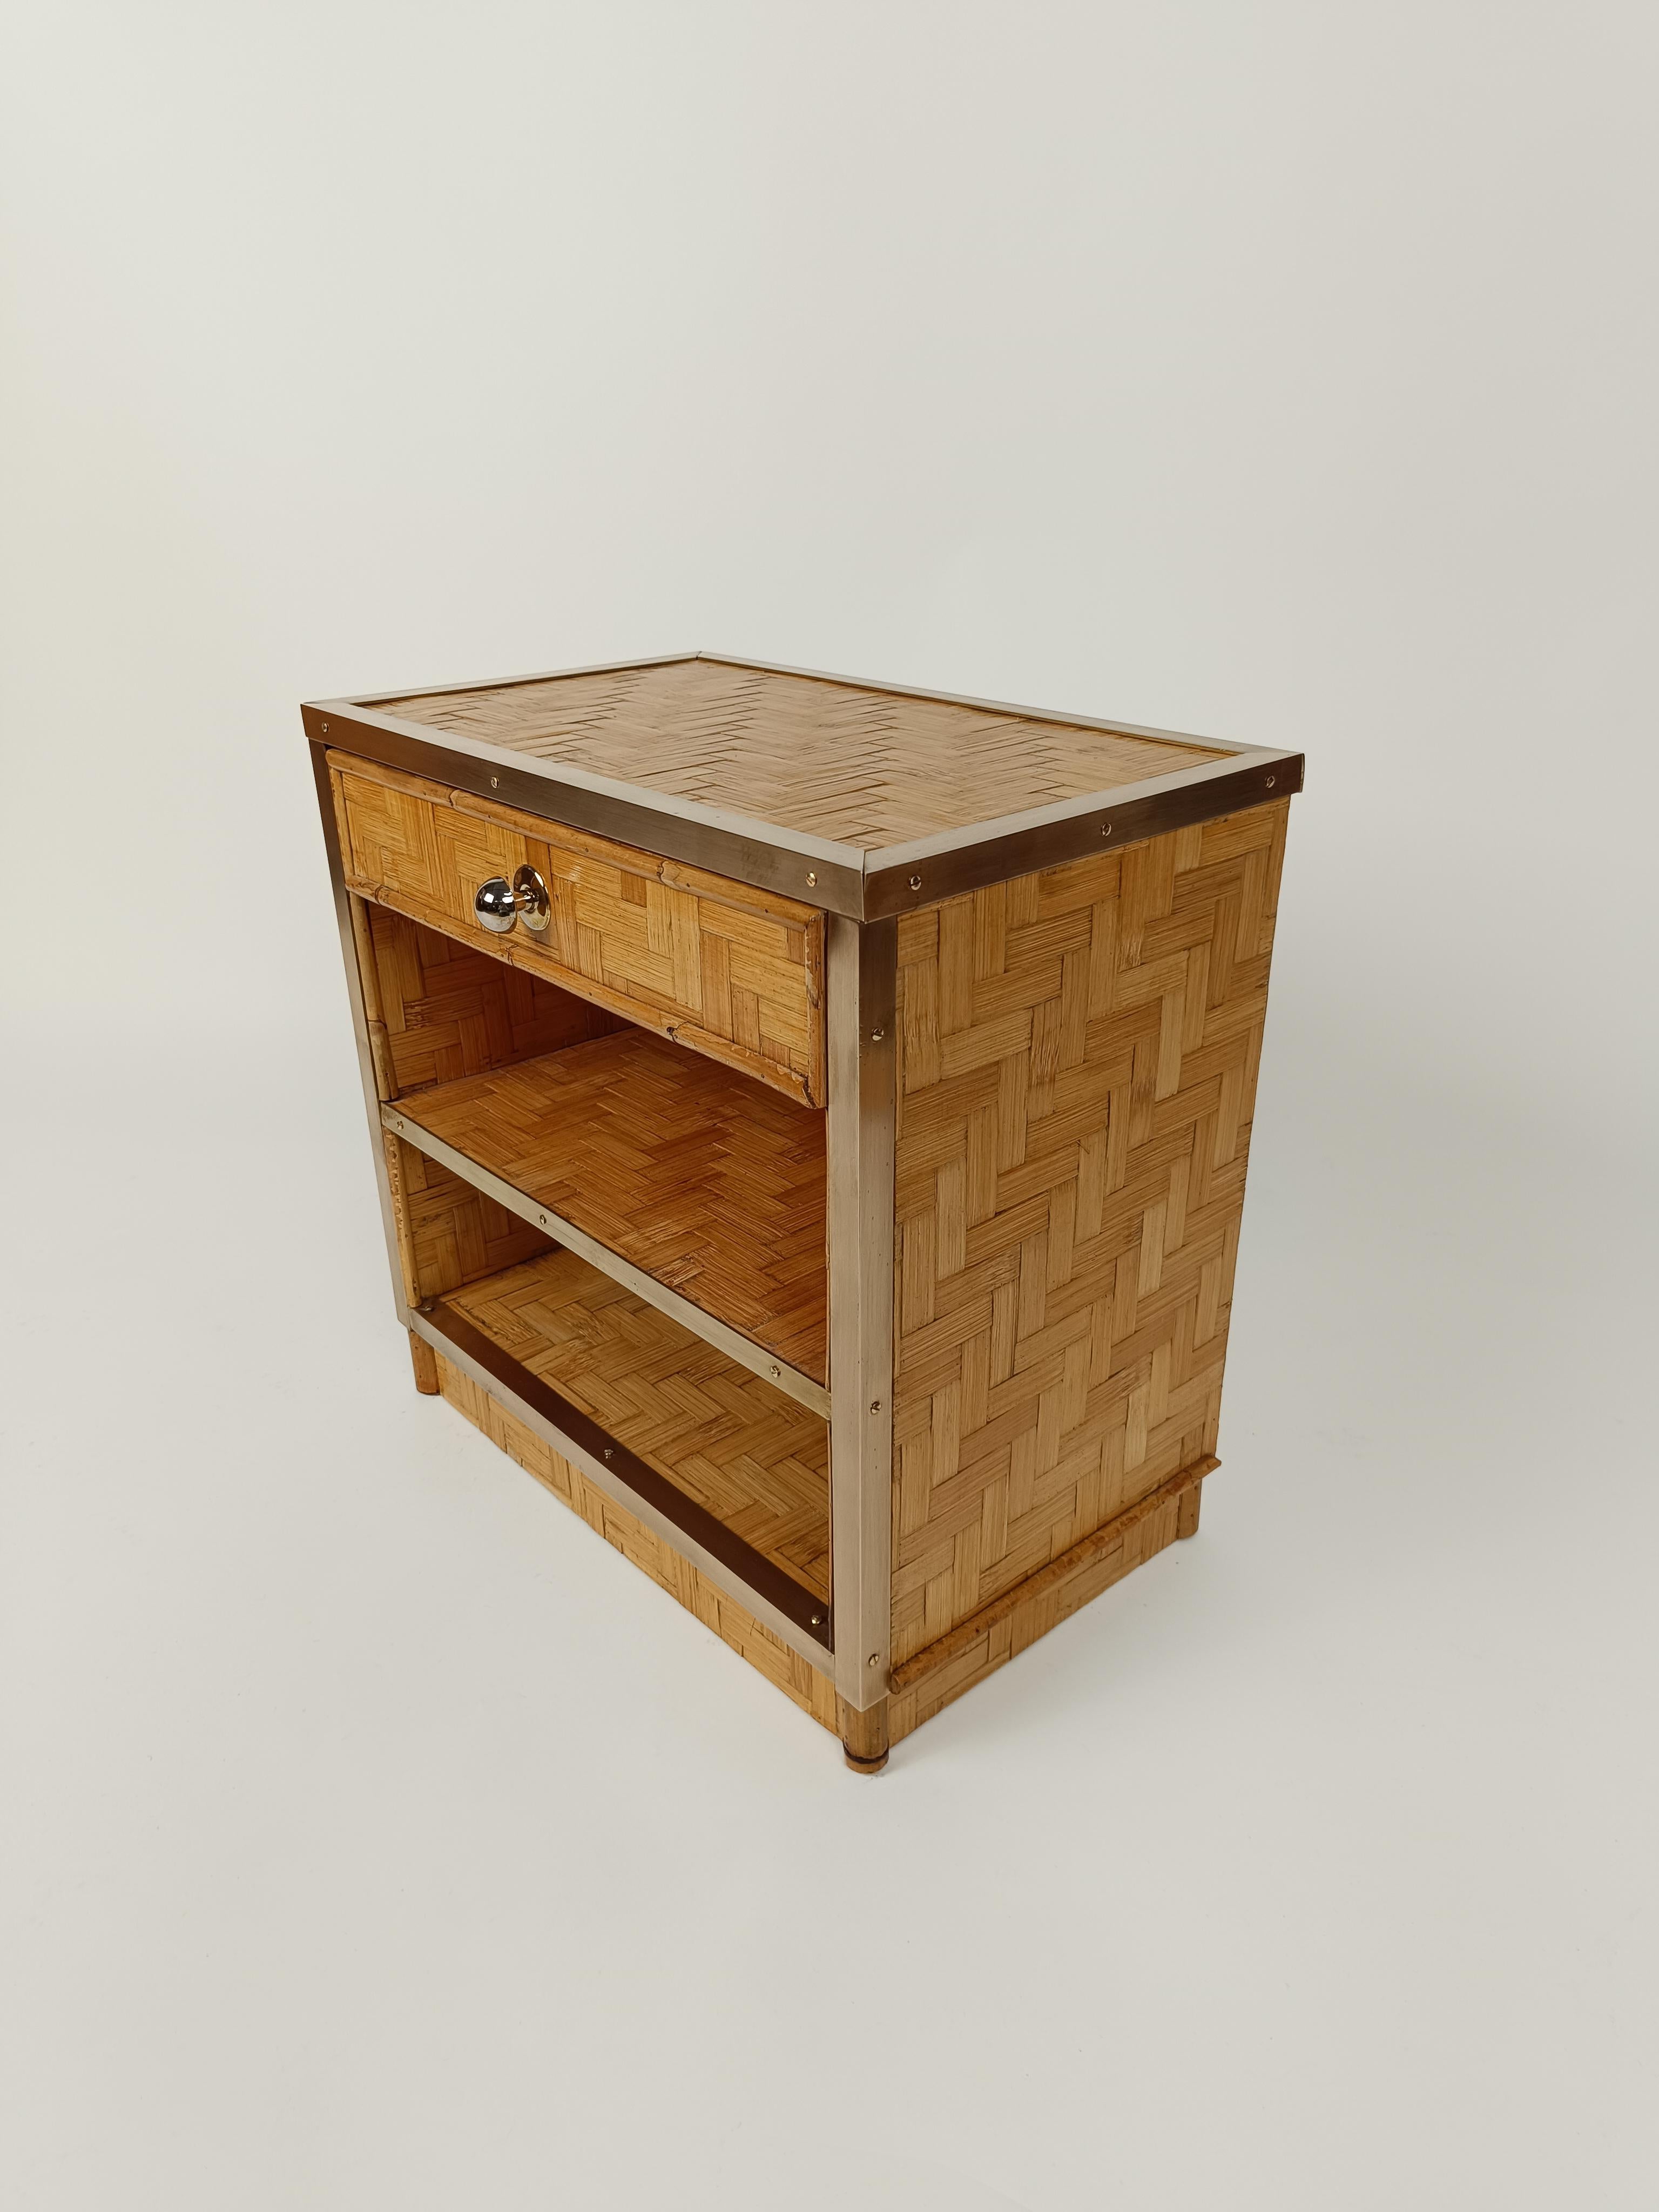 Midcentury Italian Bedside Tables in Bamboo Cane, Rattan and Brass, 1970s For Sale 5